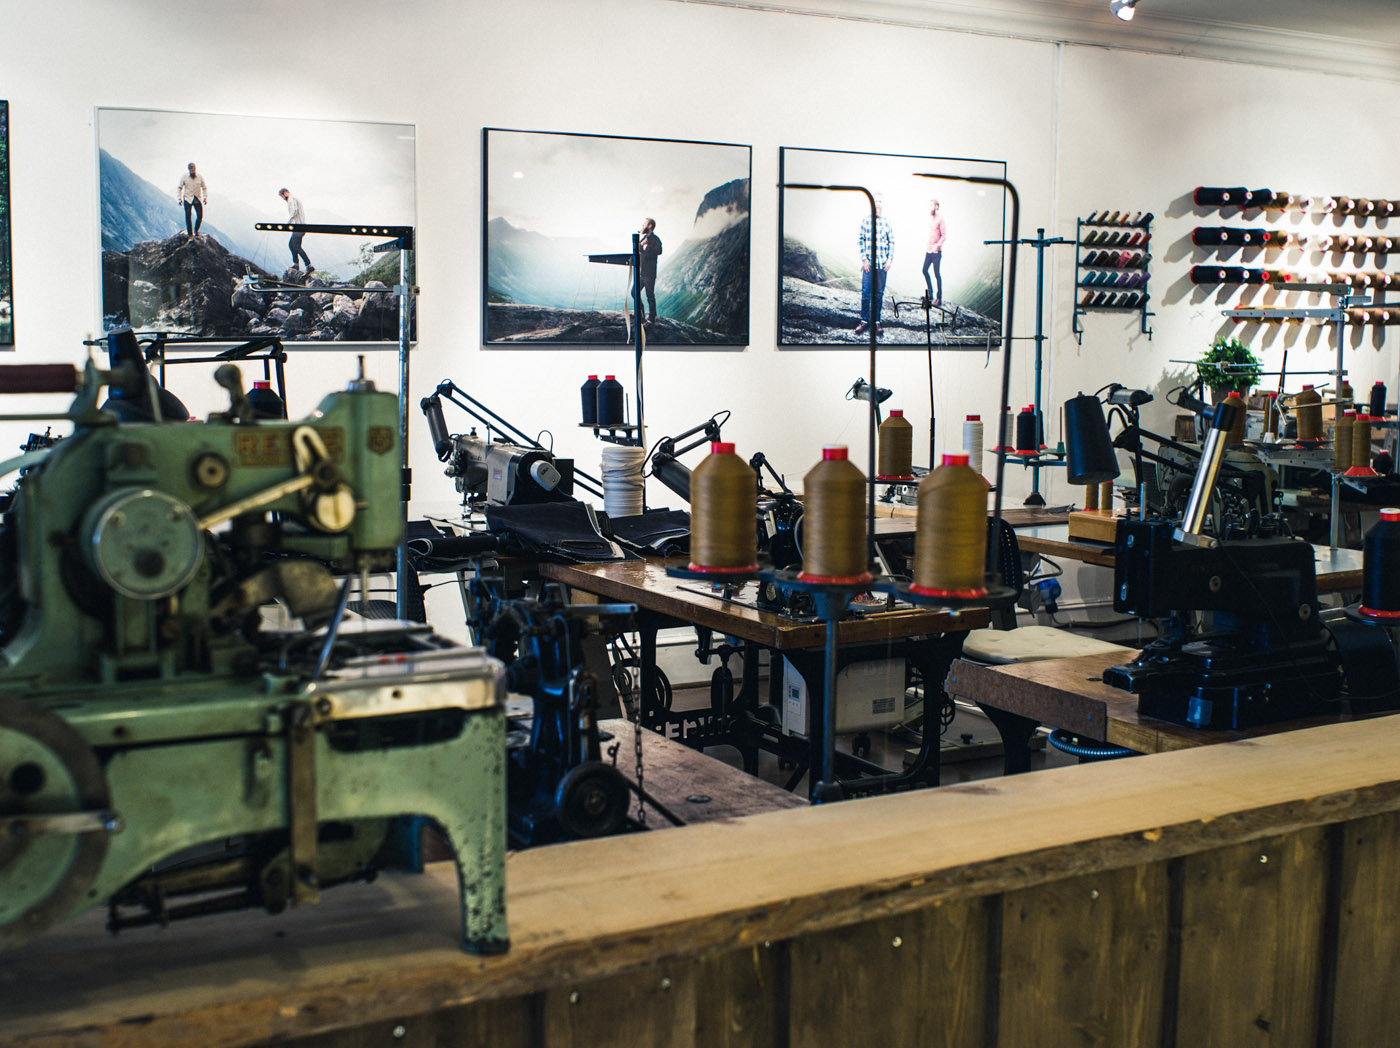 Livid Jeans flagship store in Trondheim, Norway (13 of 21)